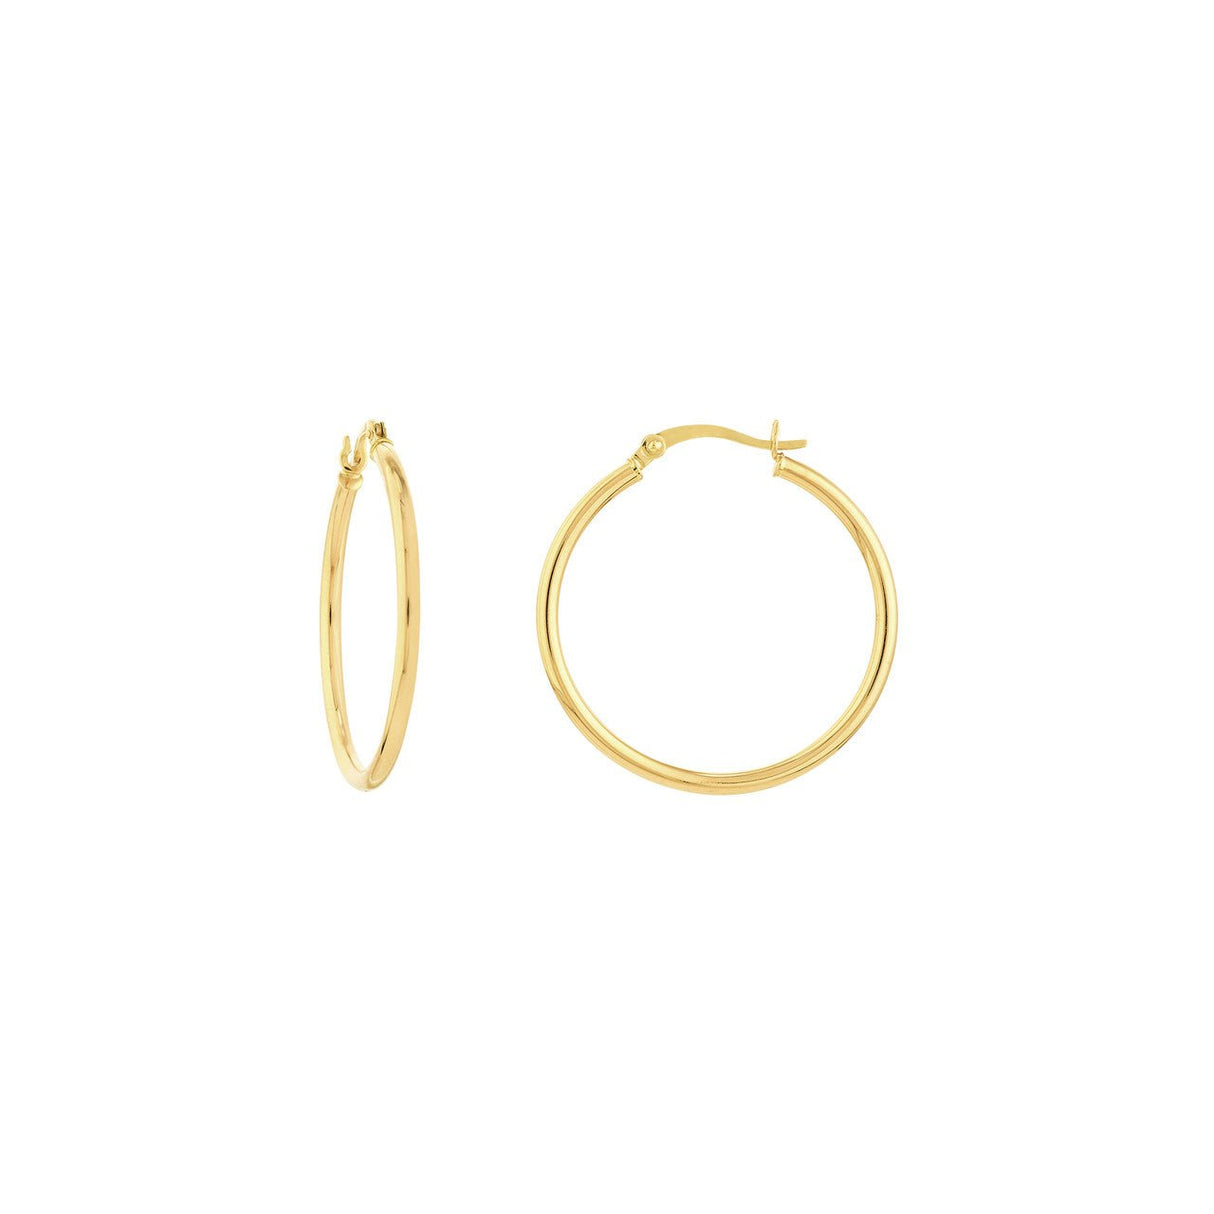 2mm x 30mm Polished Hoop Earrings,  Gold earring for all occasions gift,  Gold earring from Diamond Origin,  Dazzling from every angle, these 14K gold hoop earrings from the 2023 Collection will feel effortlessly stylish on your ears. The 2mm x 30mm polished hoops add a touch of passion and luxury to any outfit. Glam up your look with these beautiful earrings. Make a statement you won't forget!   